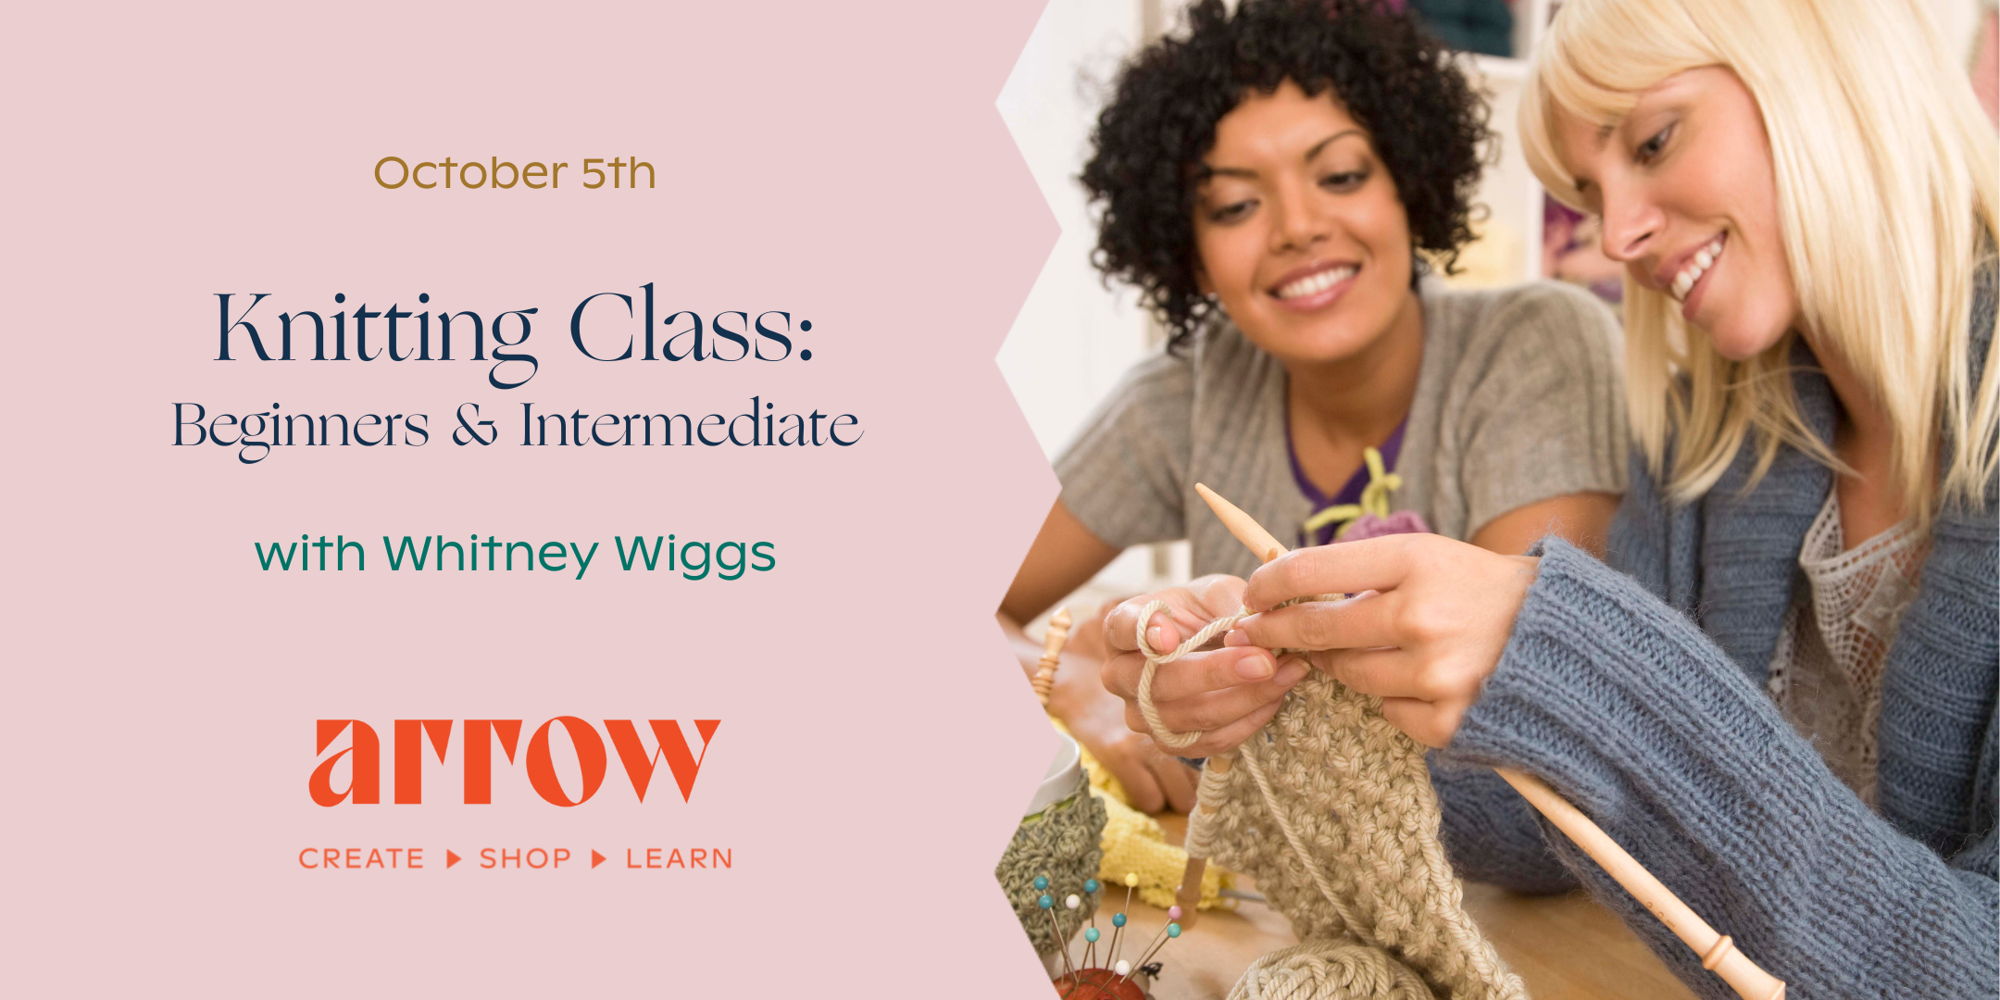 Knitting Class for Beginners and Intermediates promotional image